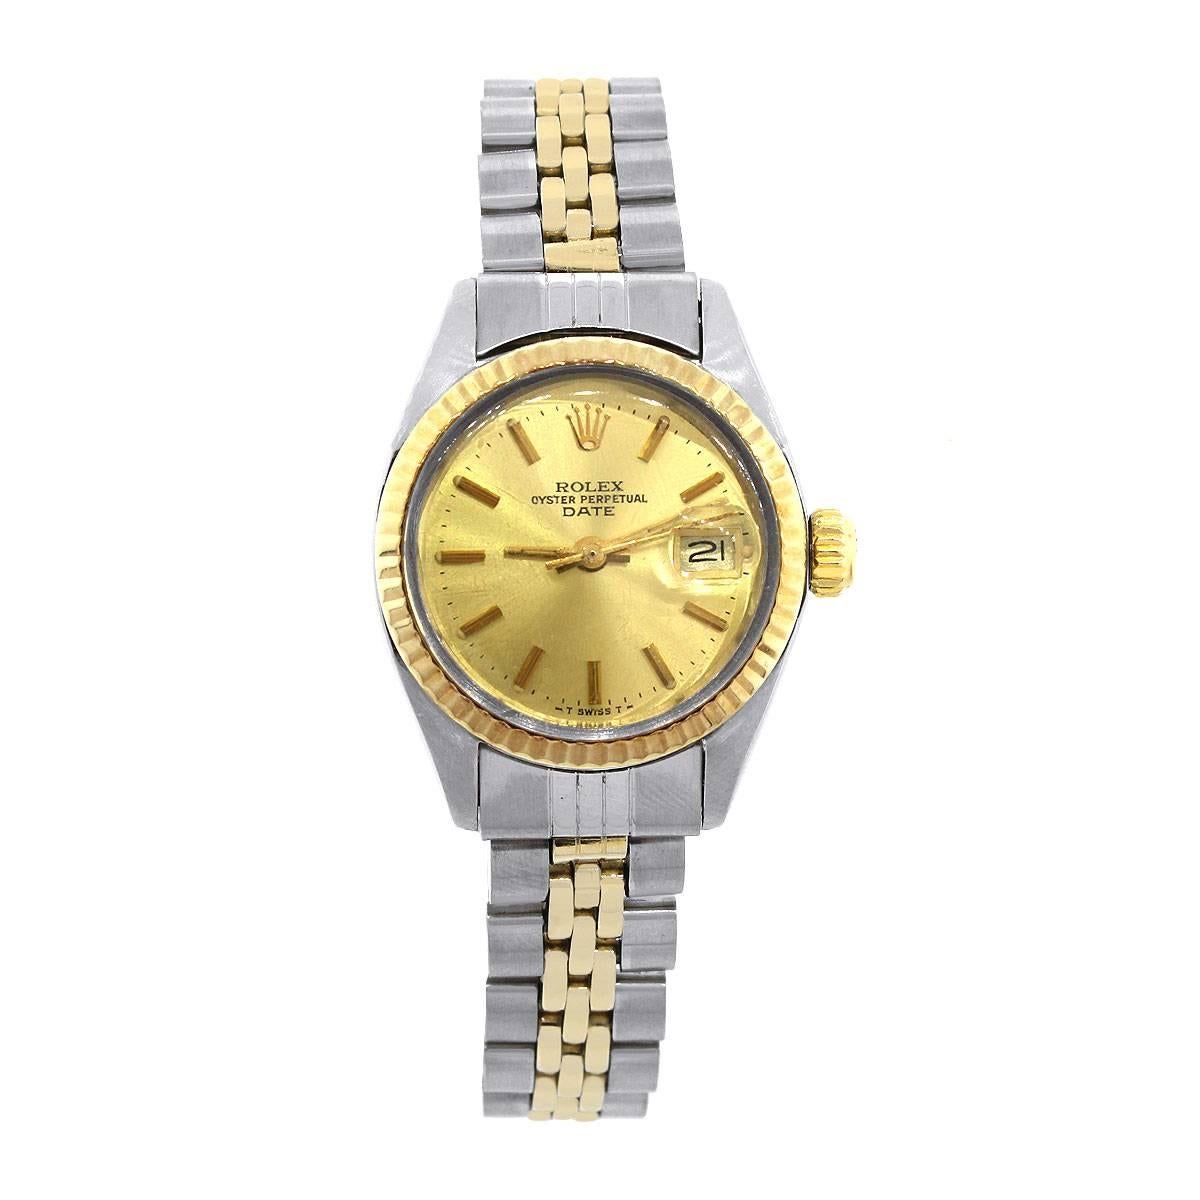 Brand: Rolex
MPN: 6917
Model: Date
Case Material: 18k yellow gold
Case Diameter: 26mm
Crystal: Plastic
Bezel: 18k yellow gold fluted bezel (factory)
Dial: Champagne stick dial with gold hour markers and hands and date window at 3 o’clock
Bracelet: